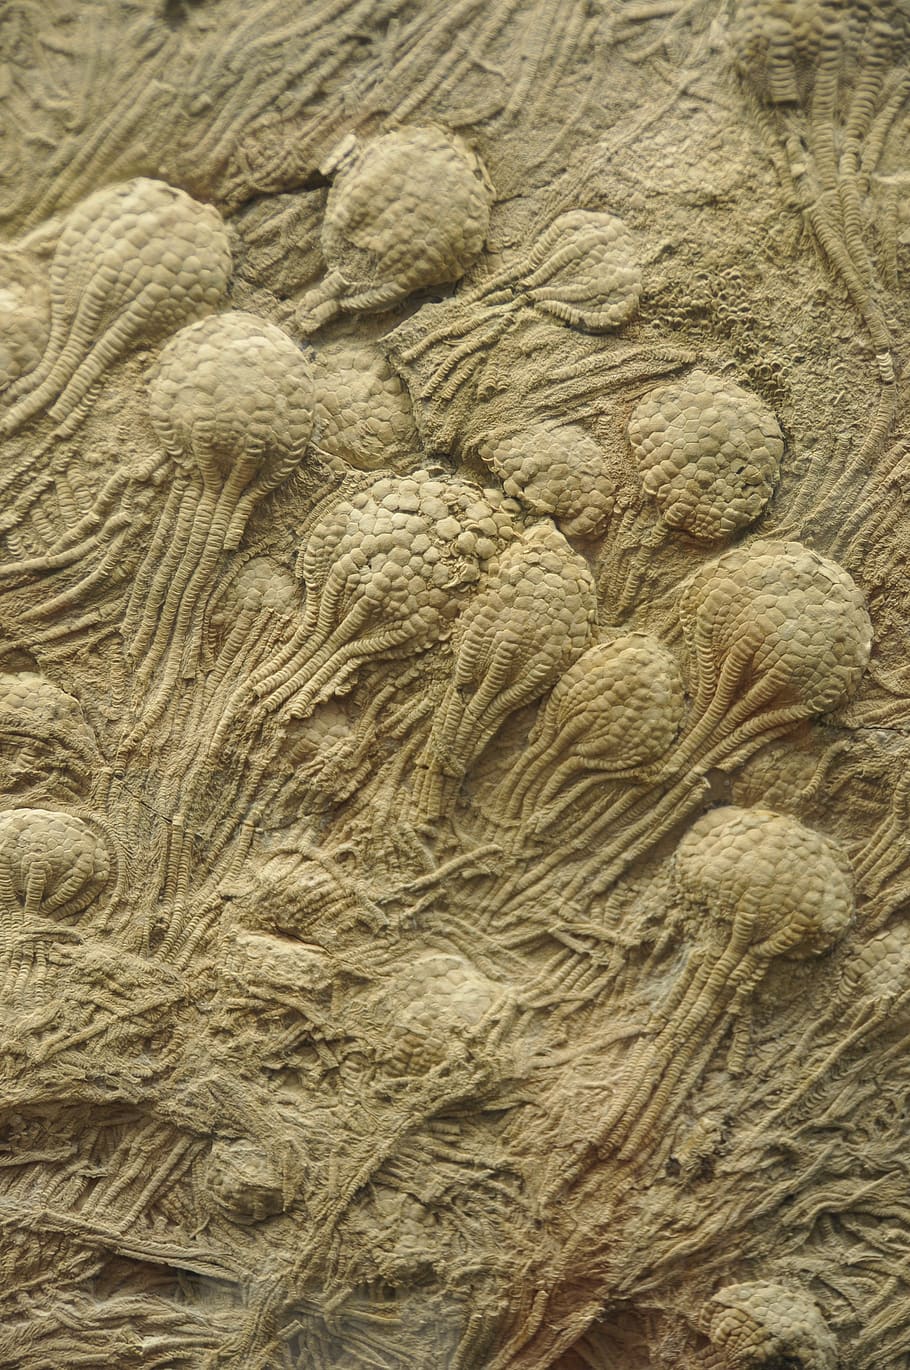 crinoids, swimming, fossil, ocean, paleozoic, full frame, backgrounds, day, close-up, creativity